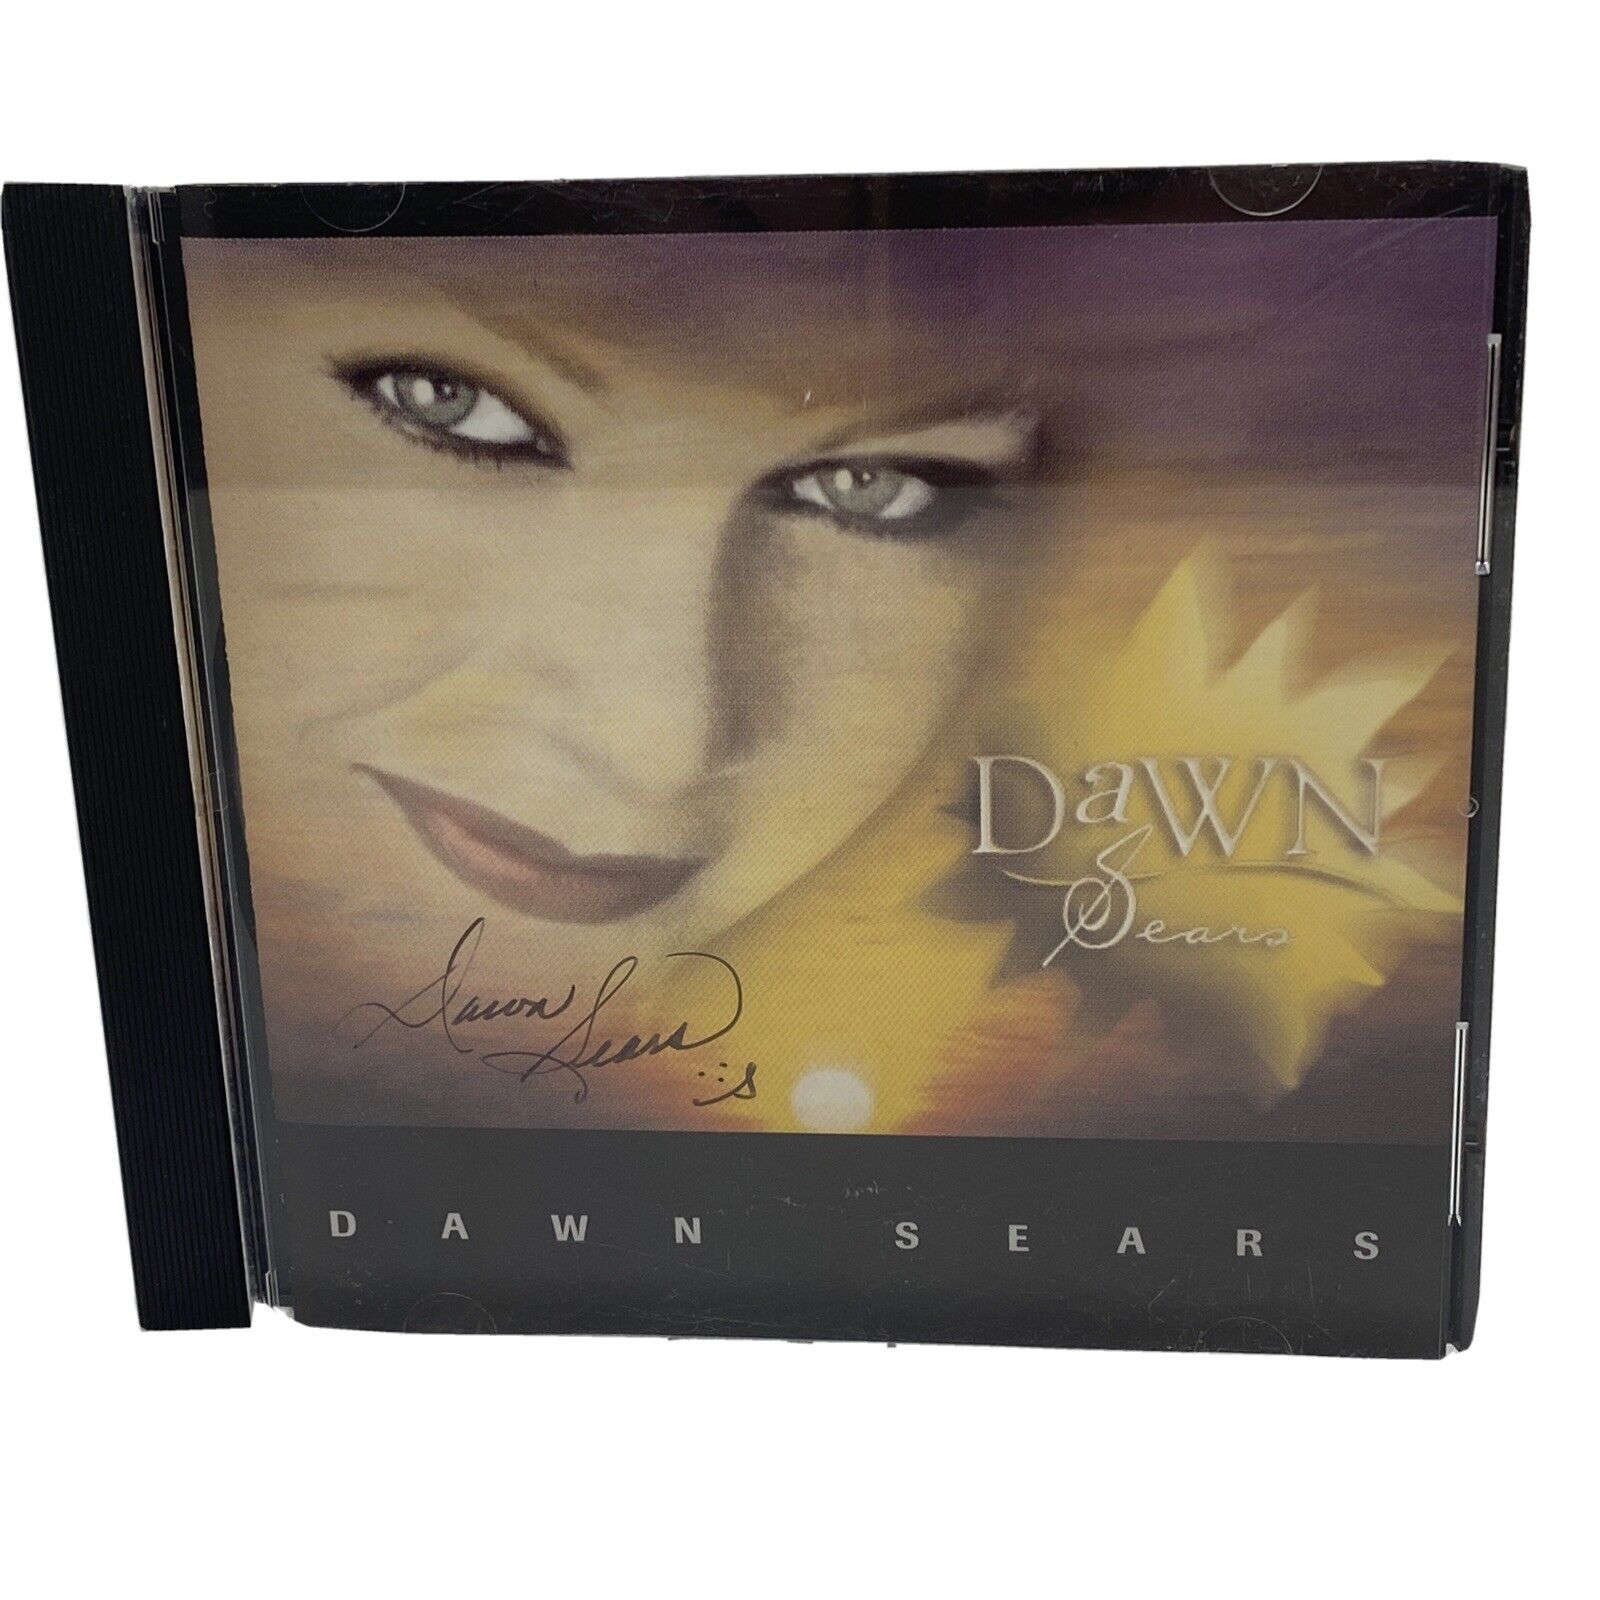 Dawn Sears Self Titled CD 2002 Connie Smith TIME JUMPERS - Signed - Autographed